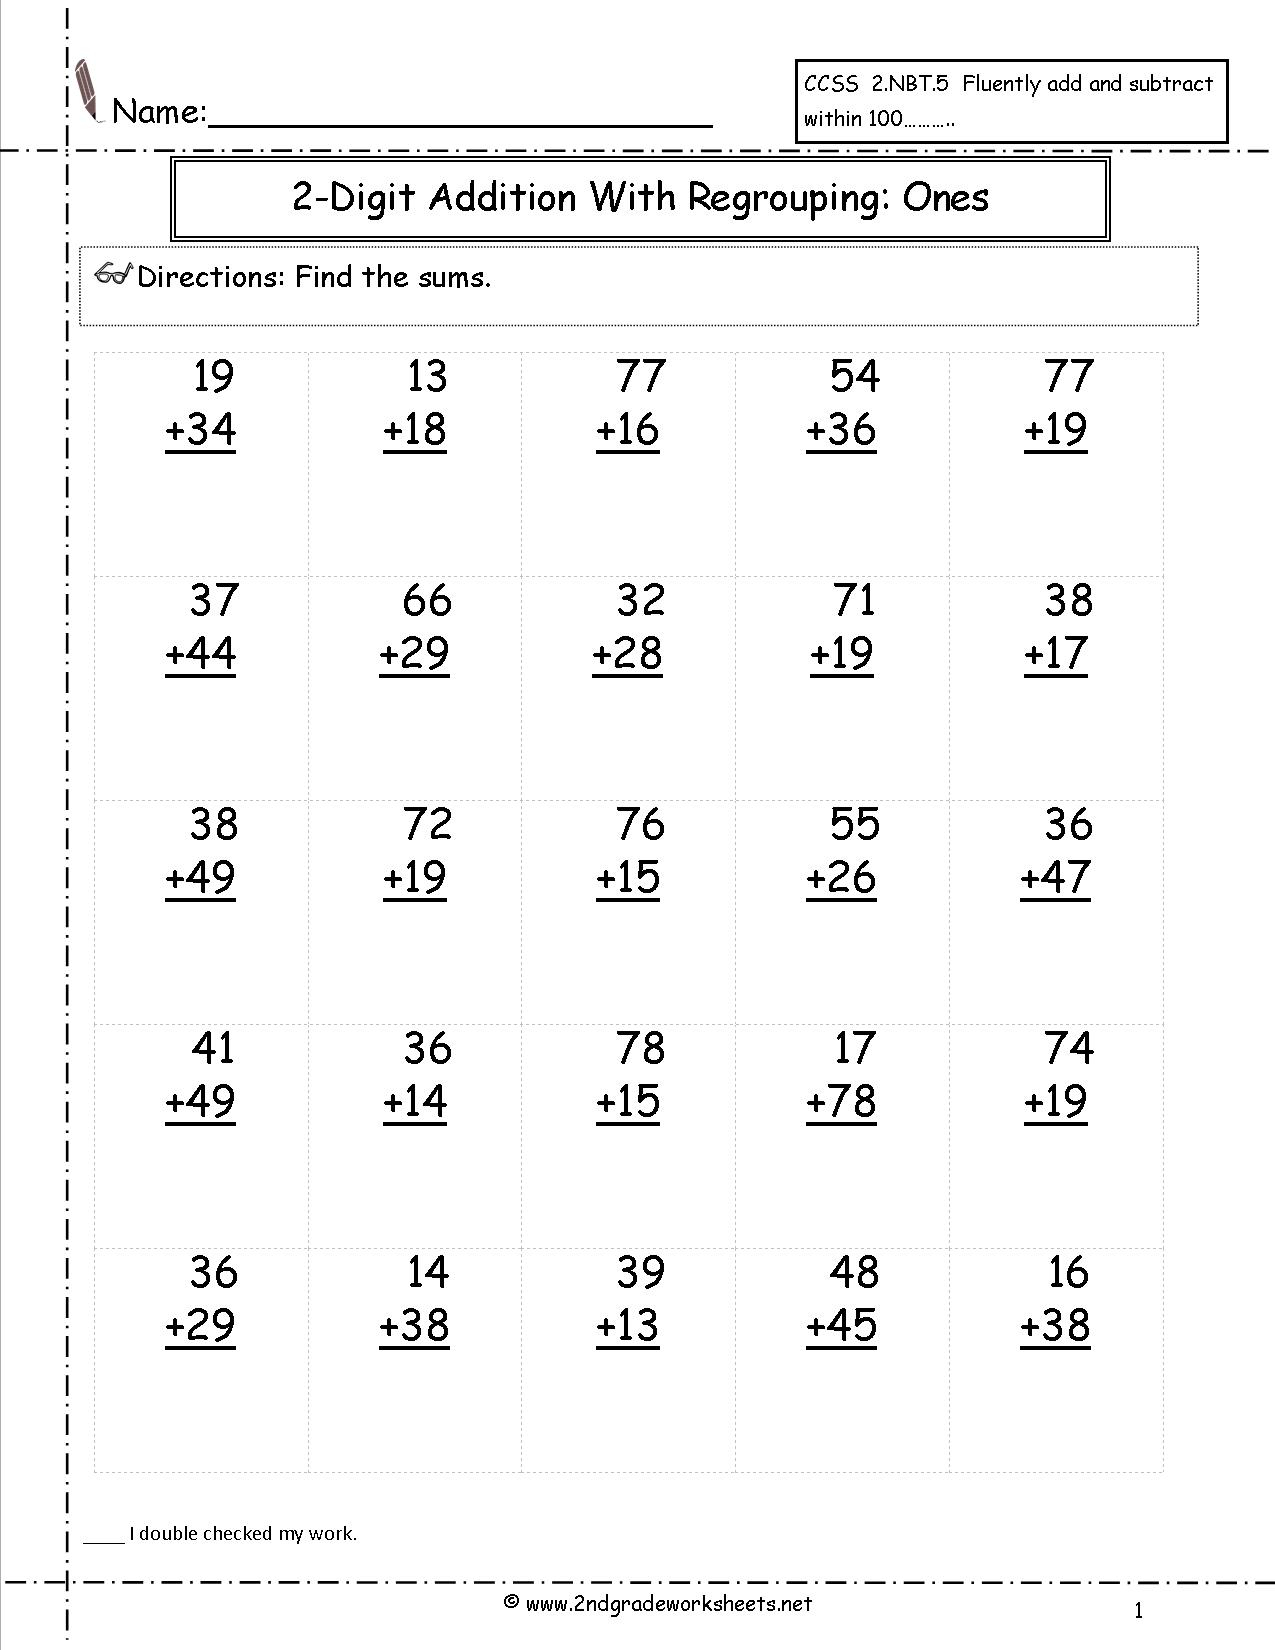 Free Math Worksheets And Printouts | Free Printable Subtraction Worksheets